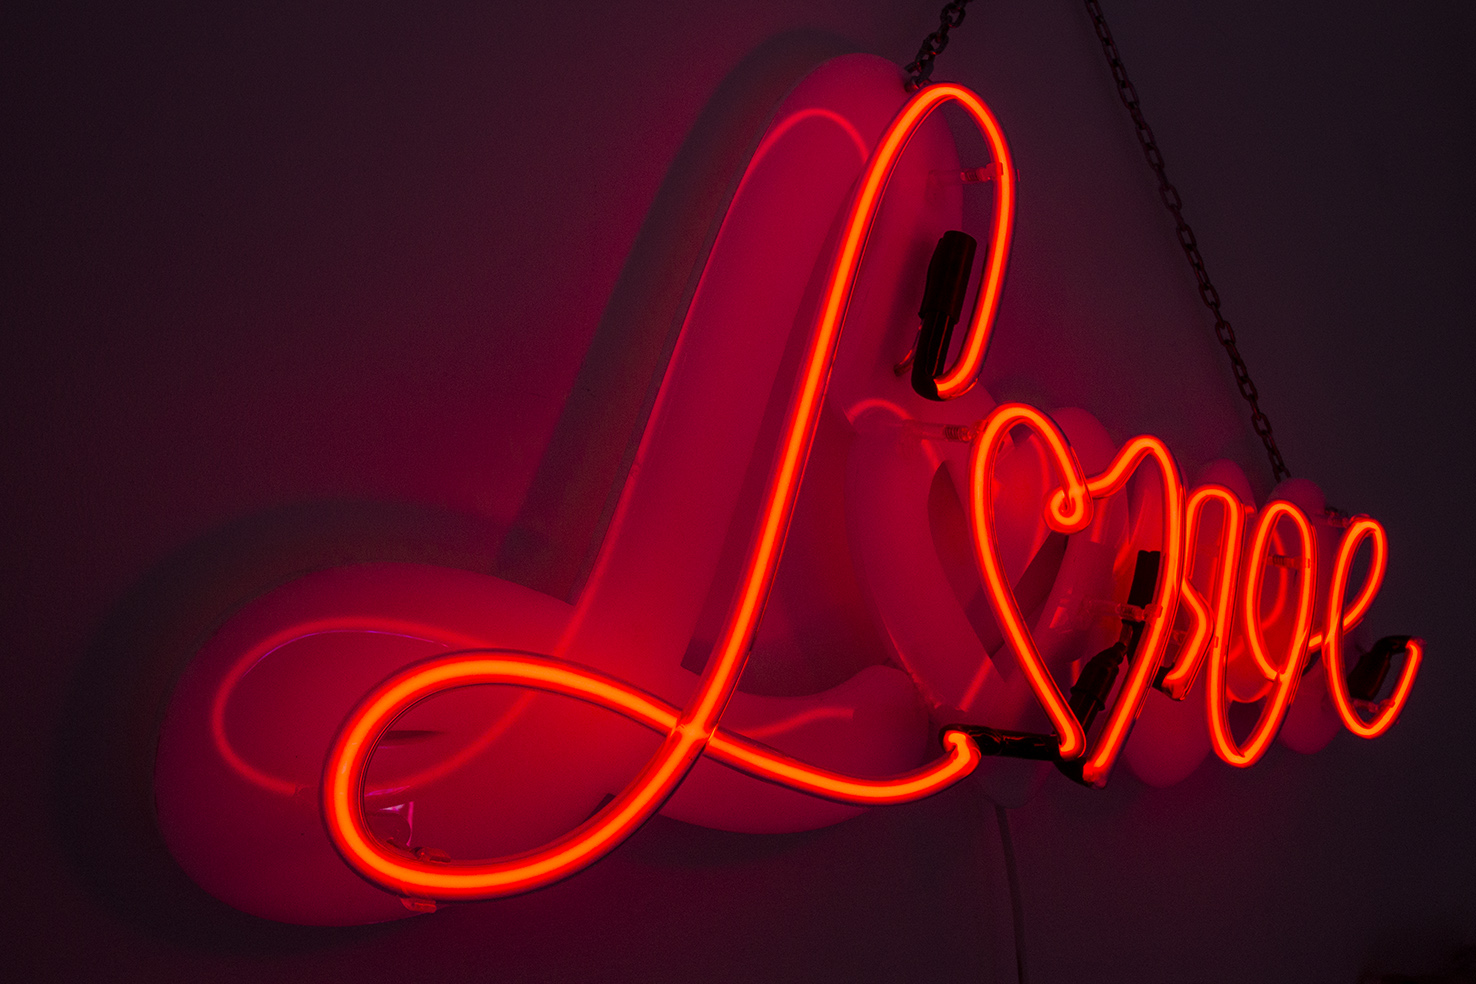 Neon Red Love - Kemp London - Bespoke neon signs and prop hire.